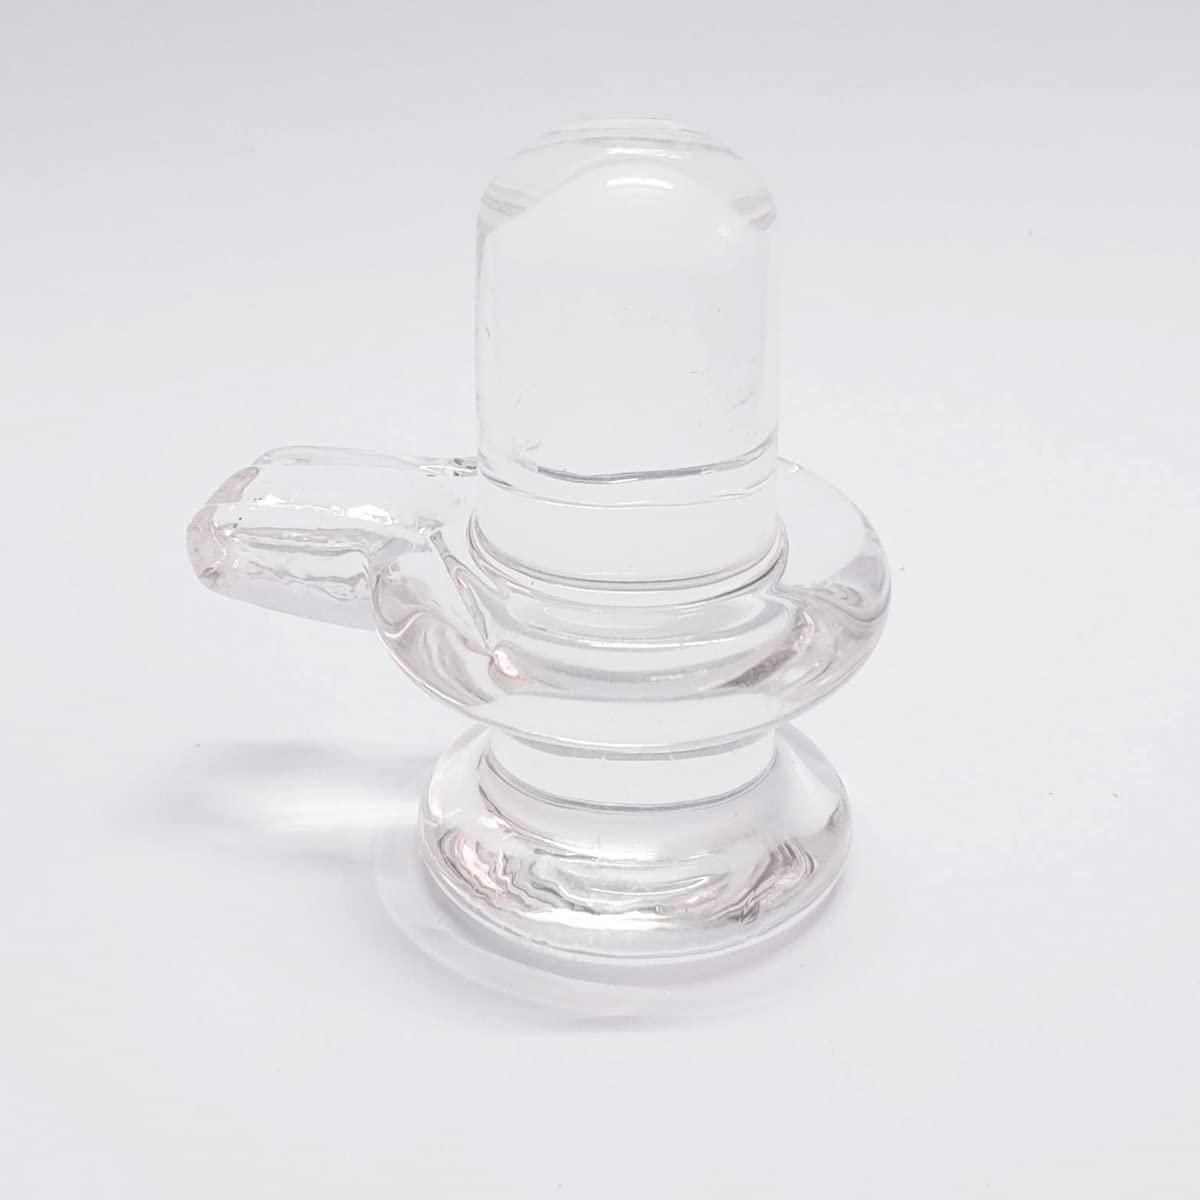 Sphatik Shivling/Big Size for Home Pooja Decorative Showpiece - 4 inch, 20gm (Crystal, White)